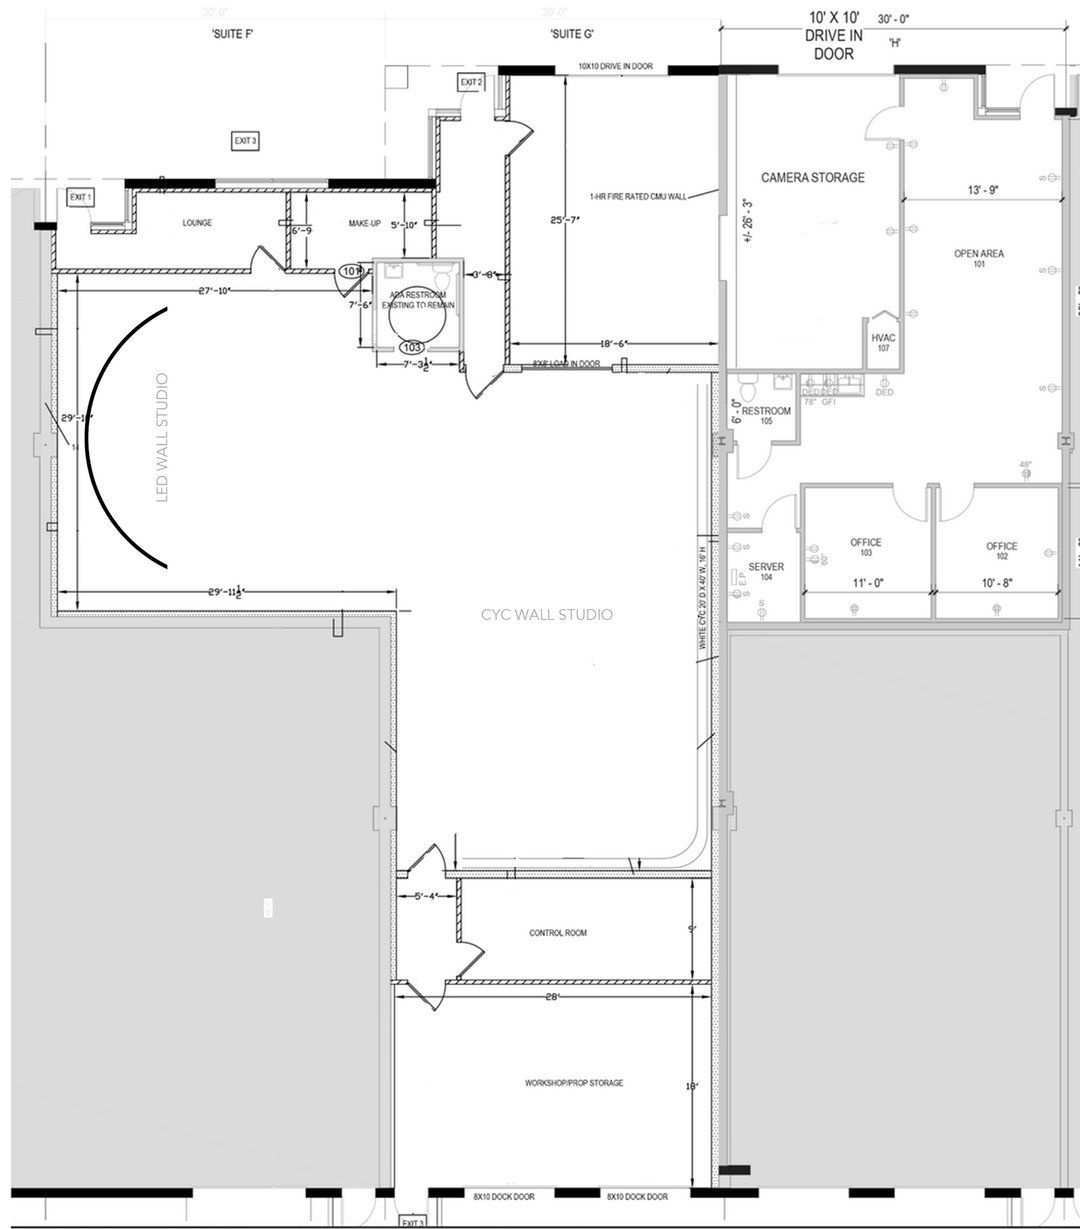 A black and white floor plan of a building